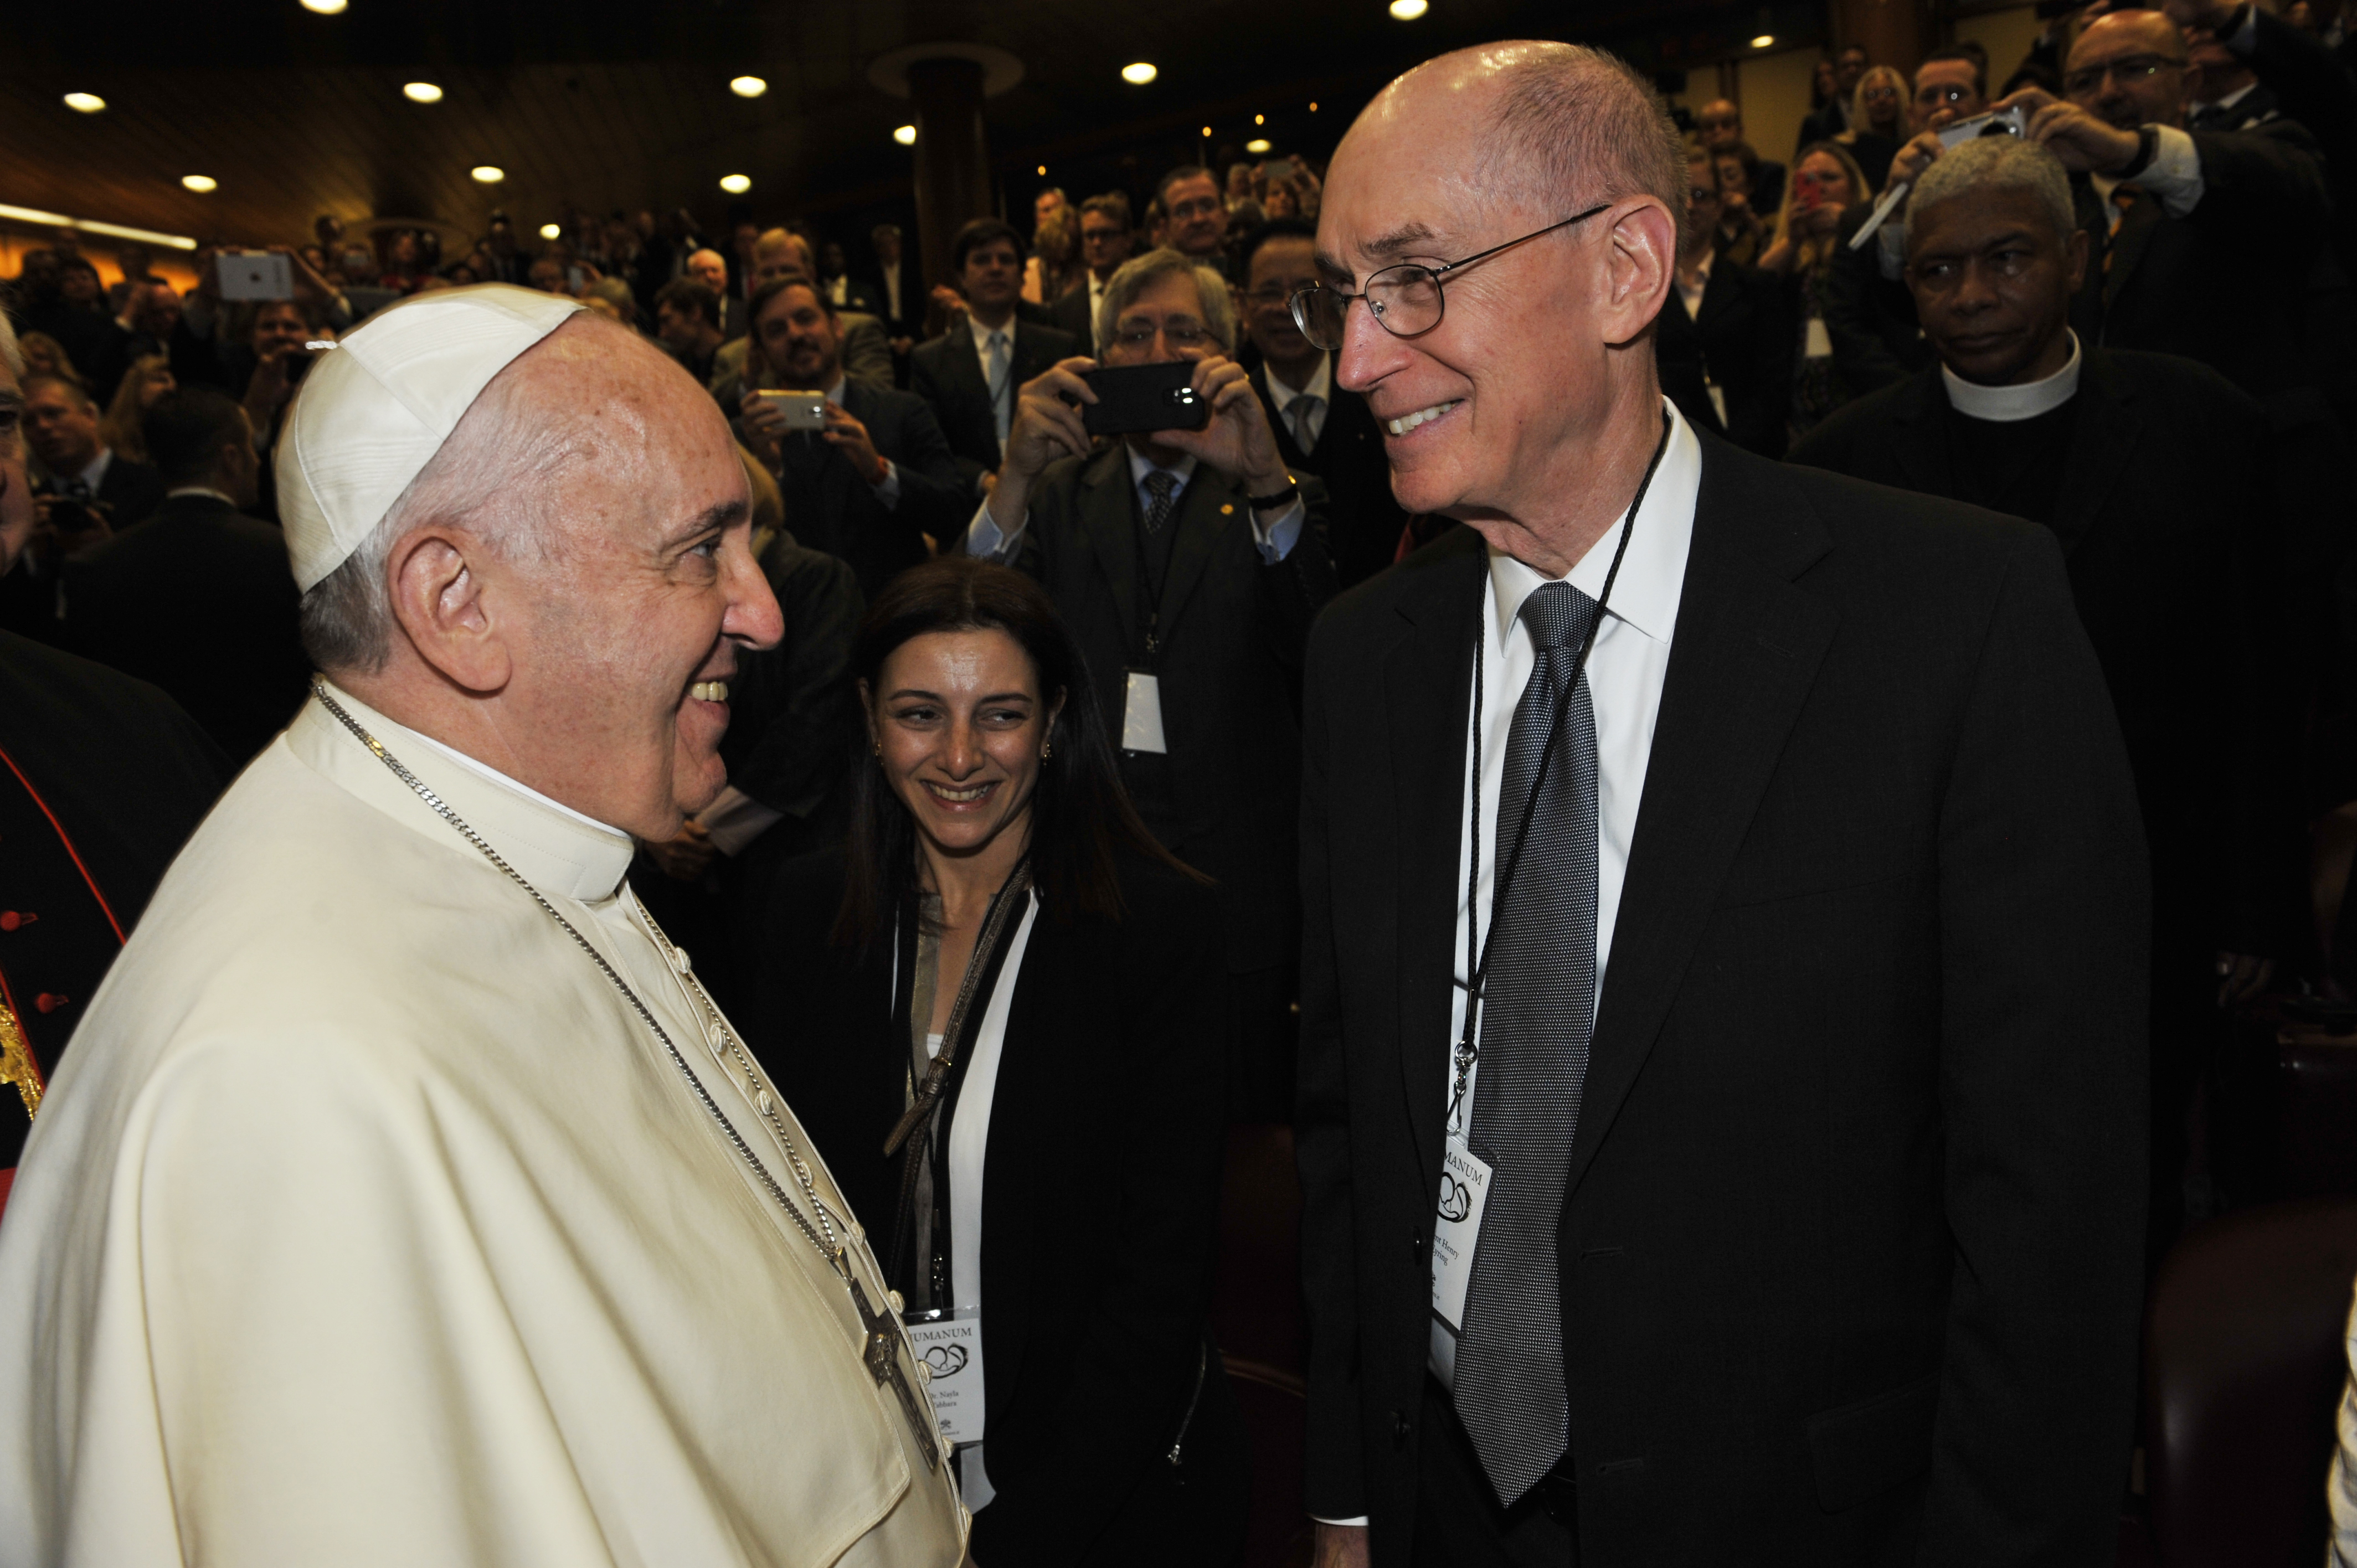 President Eyring Speaks At Vatican Summit On Marriage The Daily Universe